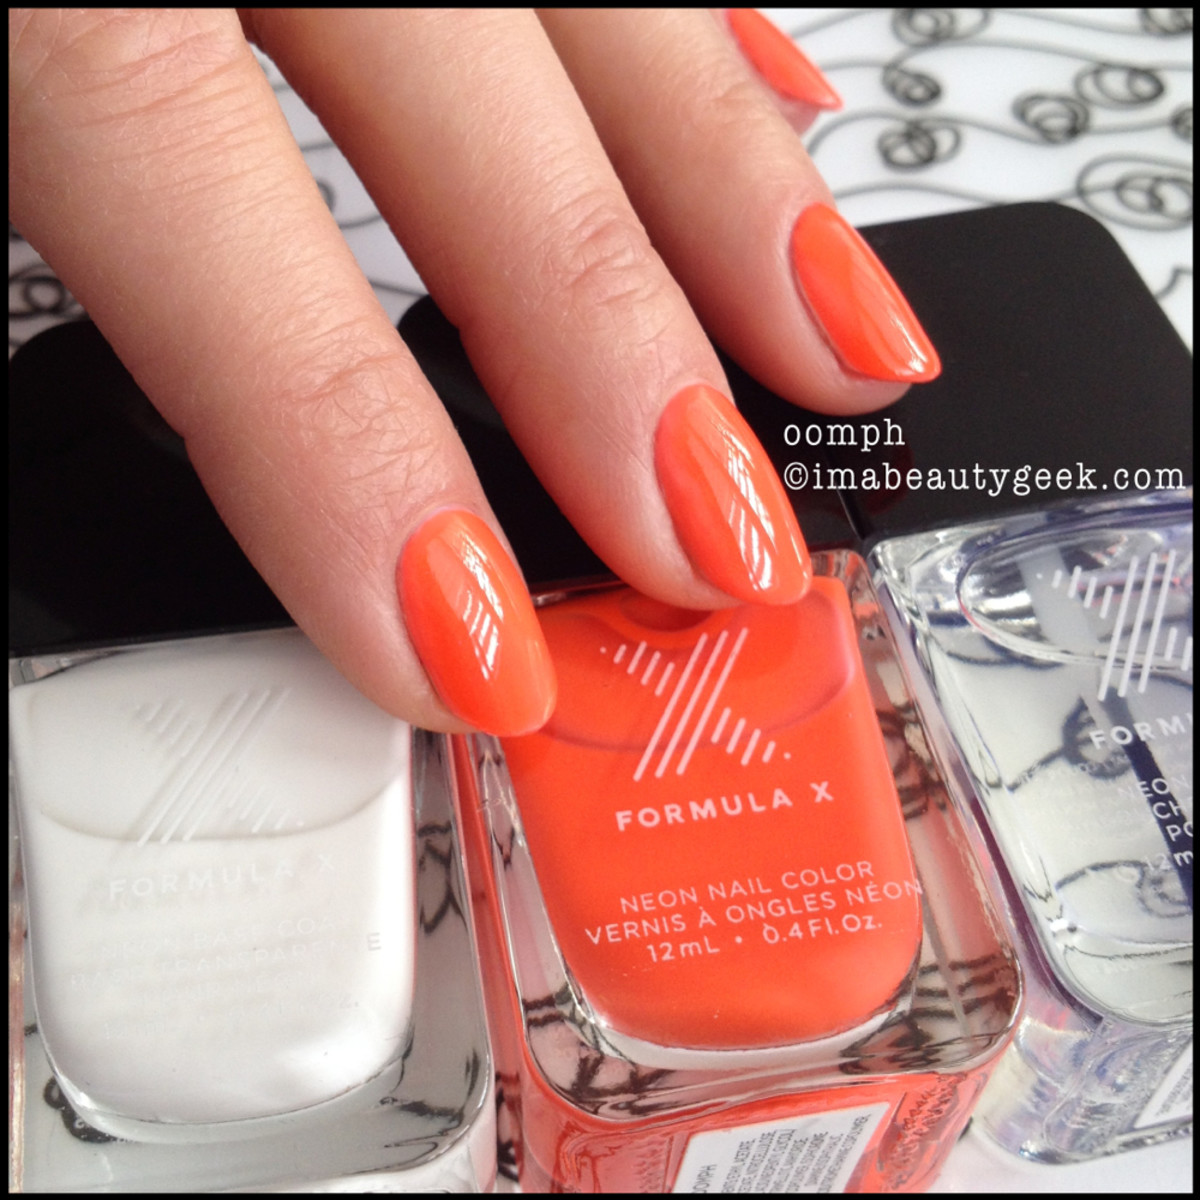 Formula X Oomph Swatch Neon 2014